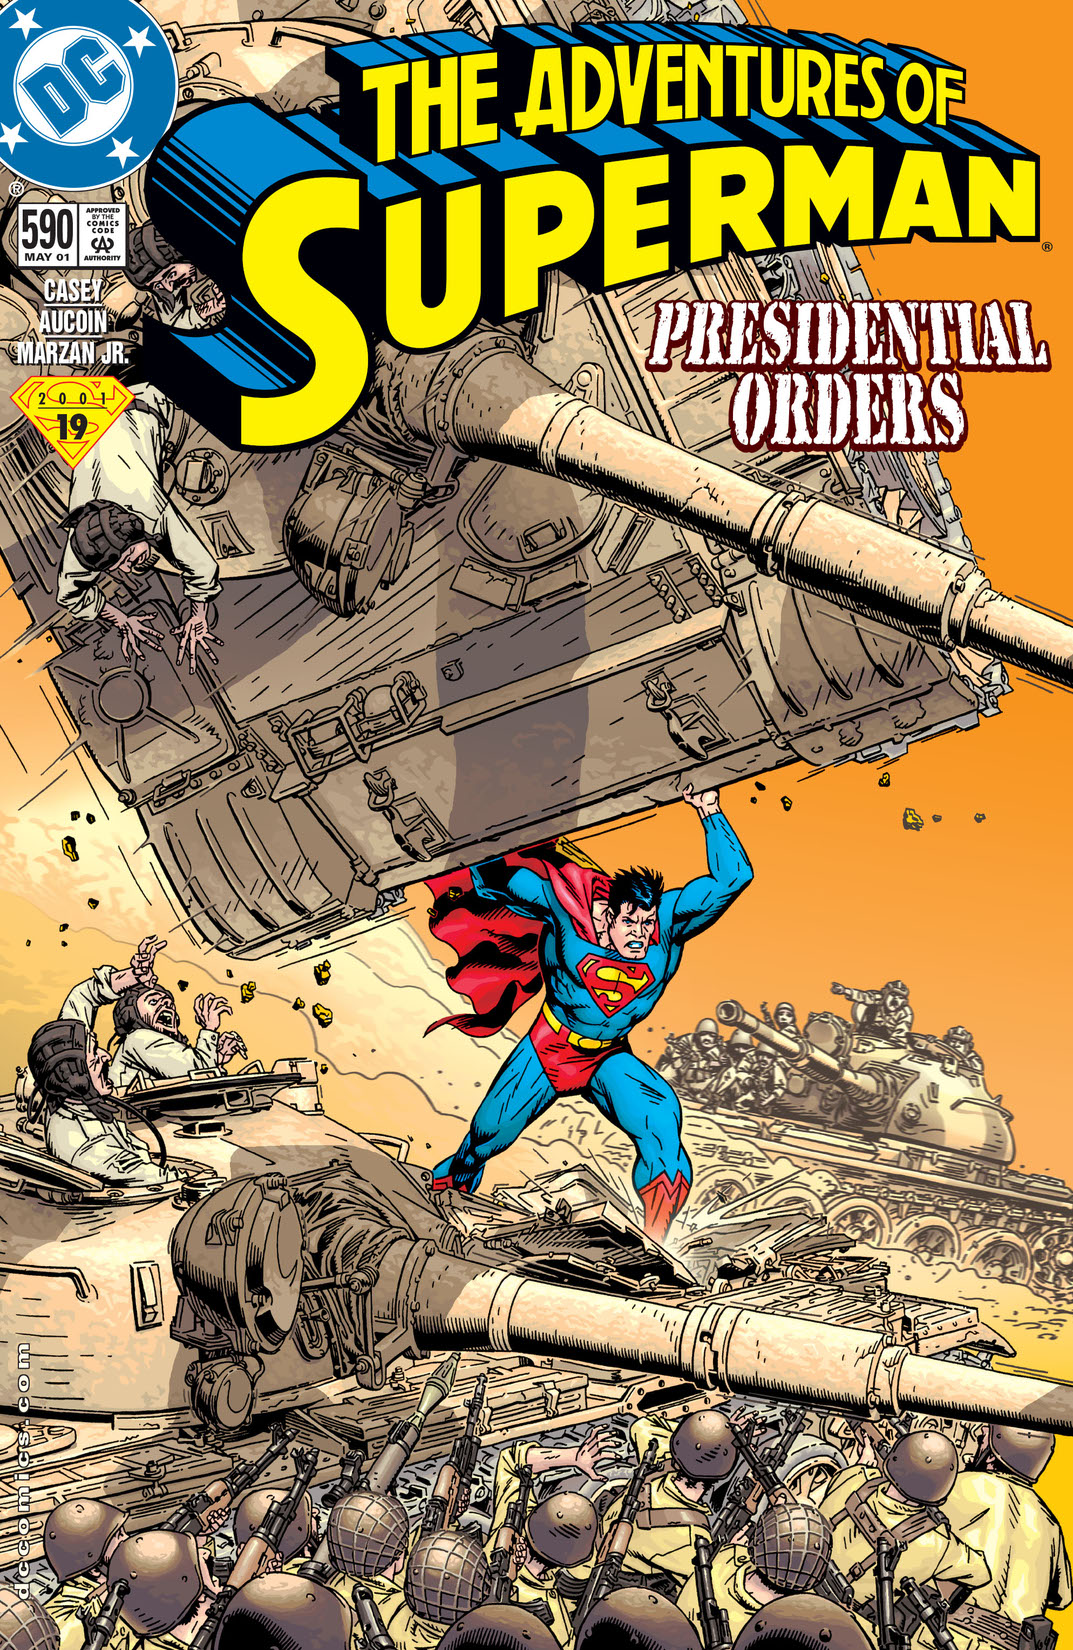 Adventures of Superman (1987-2006) #590 preview images